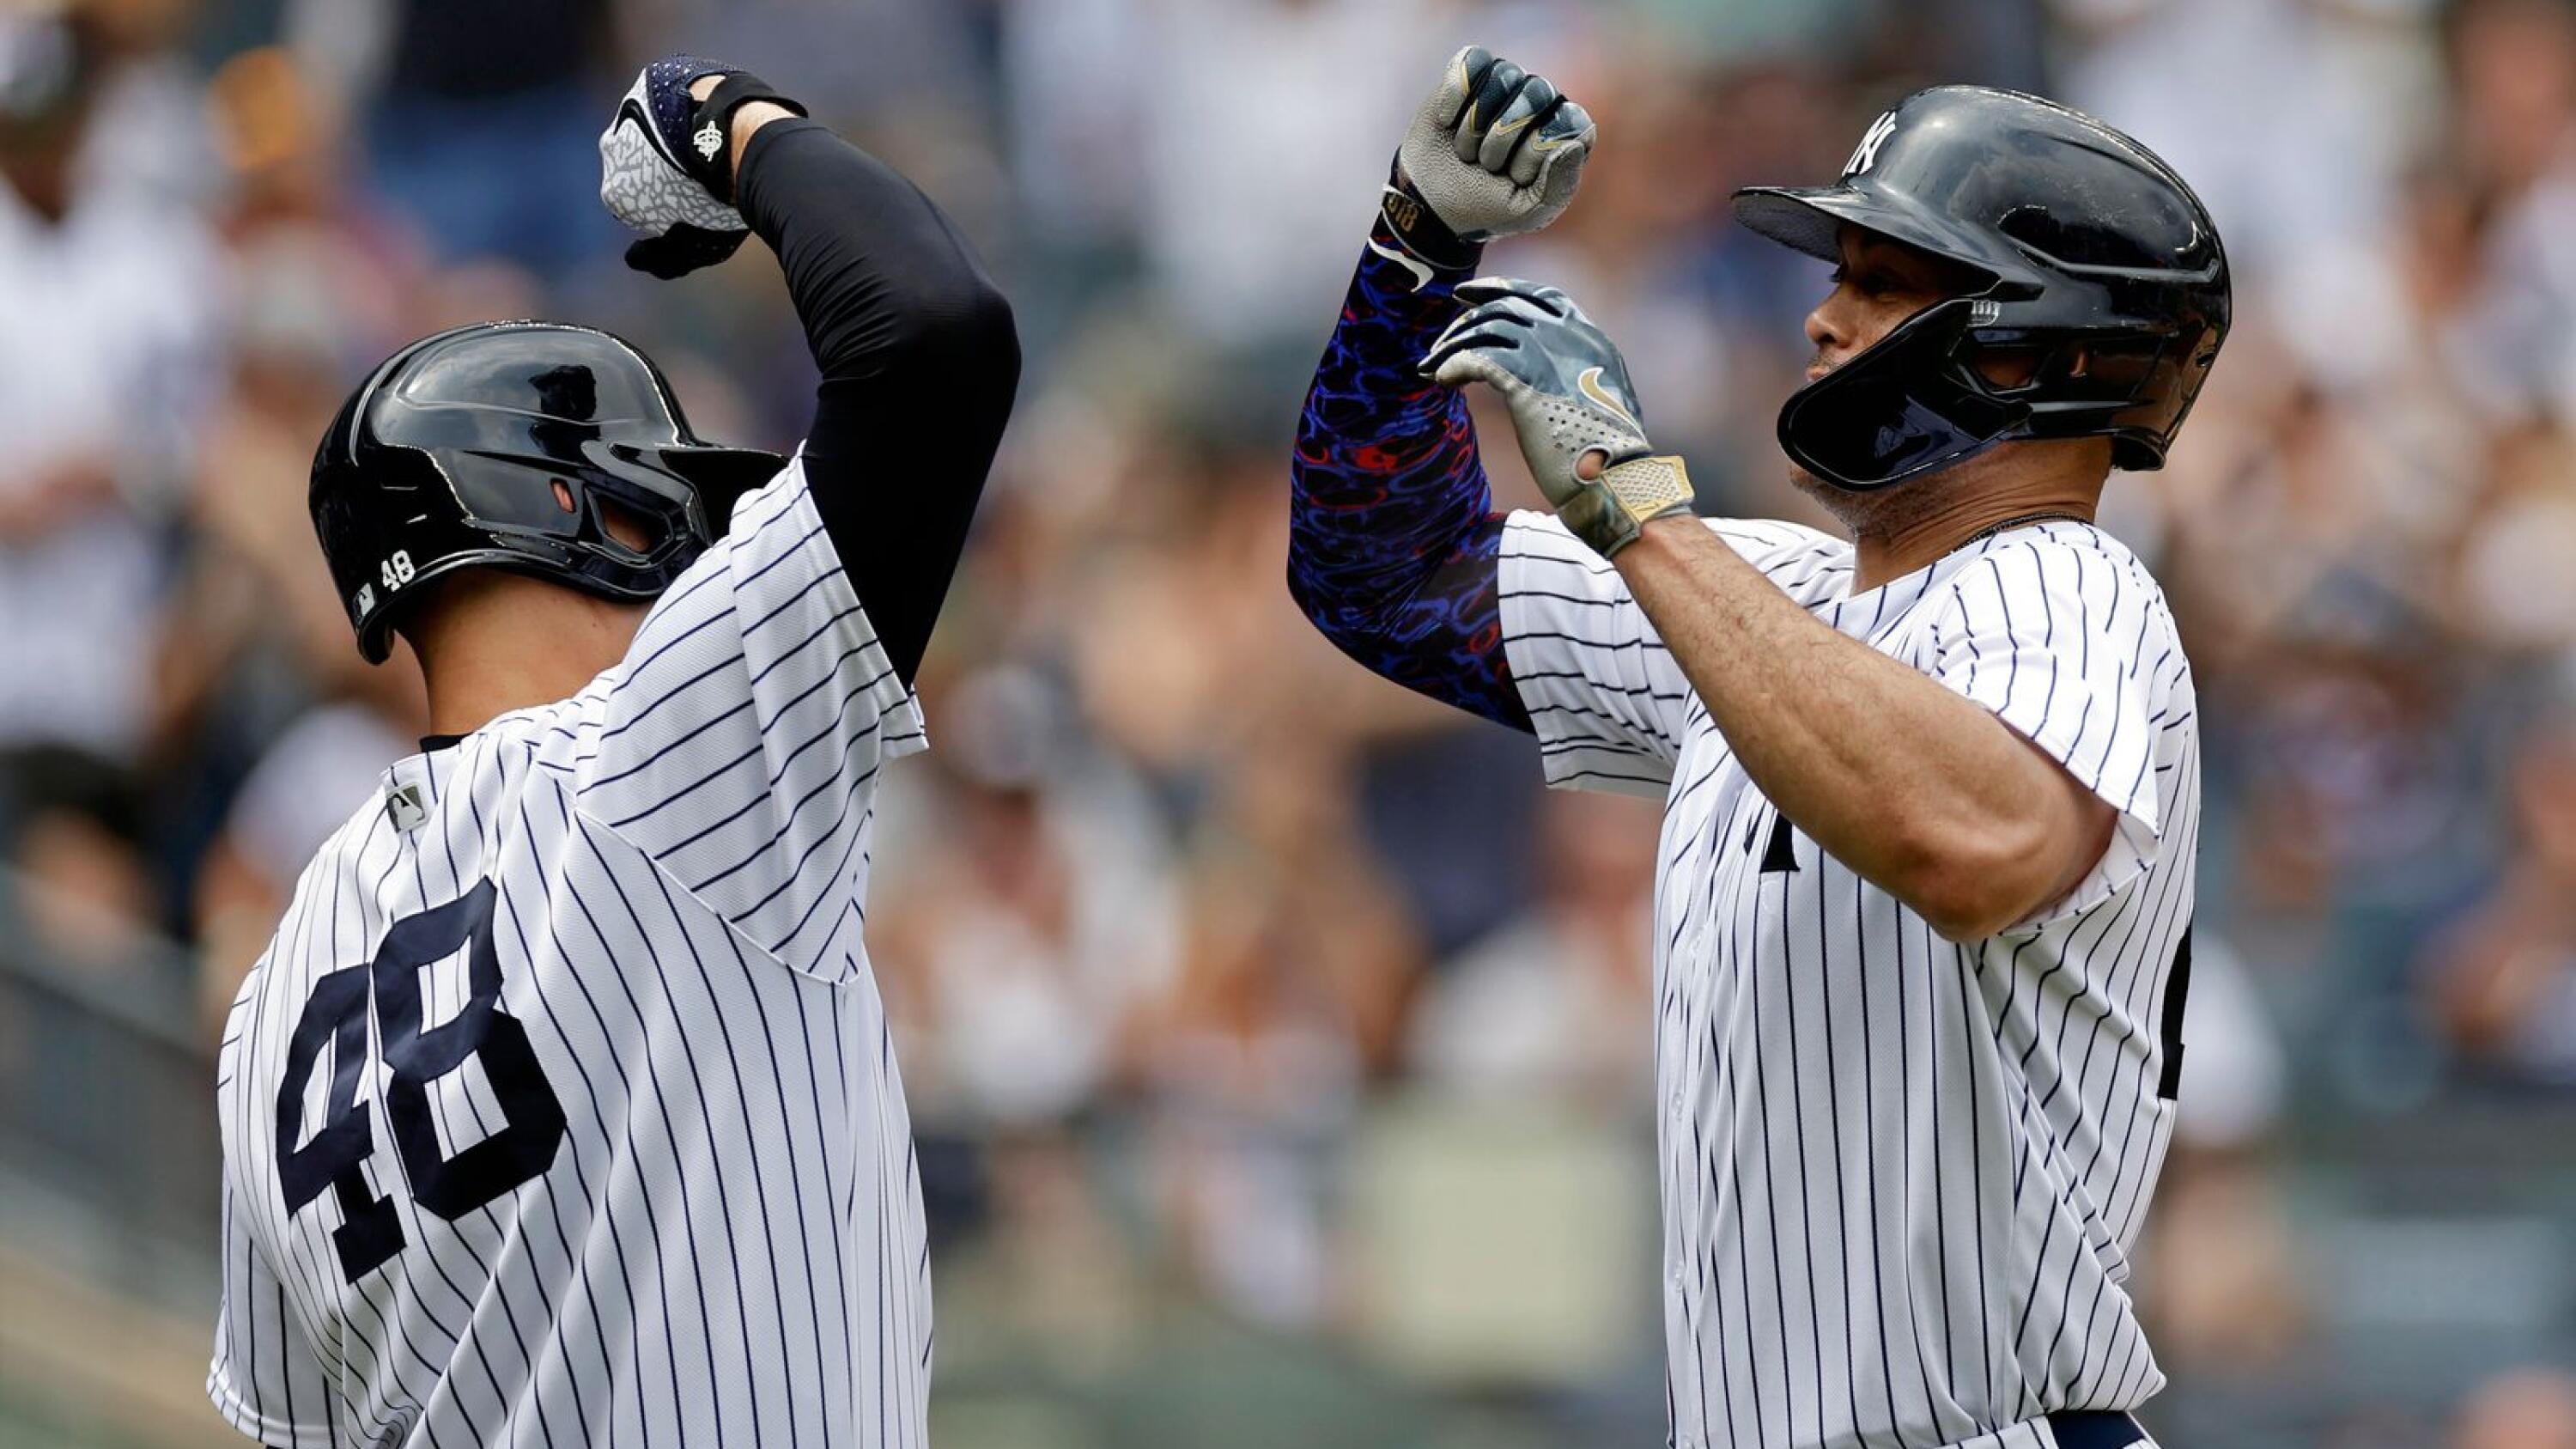 Judge homers twice, Yankees beat O's 5-3 for 3rd series win